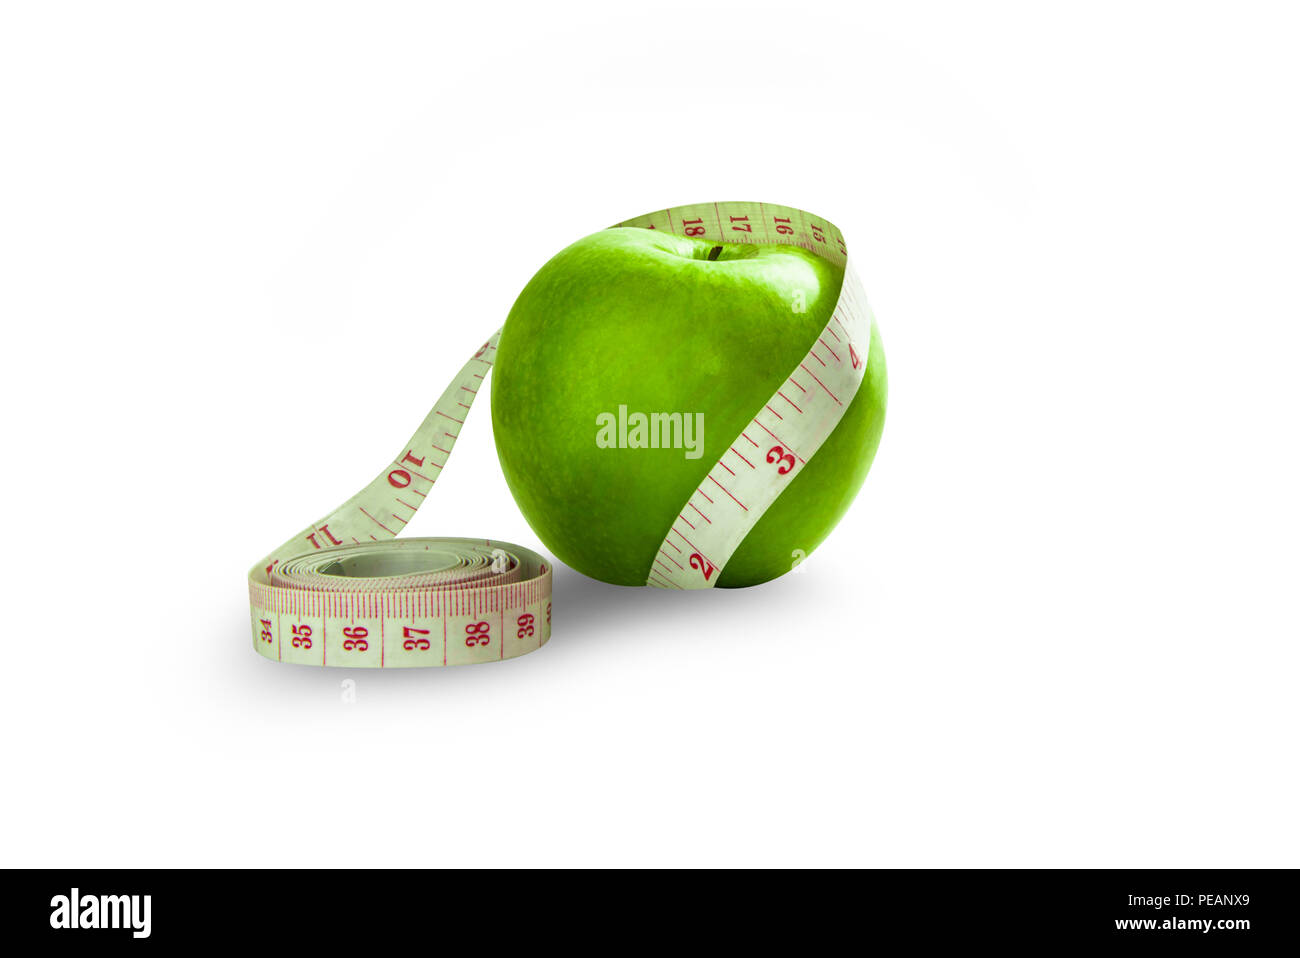 isolated green apple wrap around by measurment tape Stock Photo